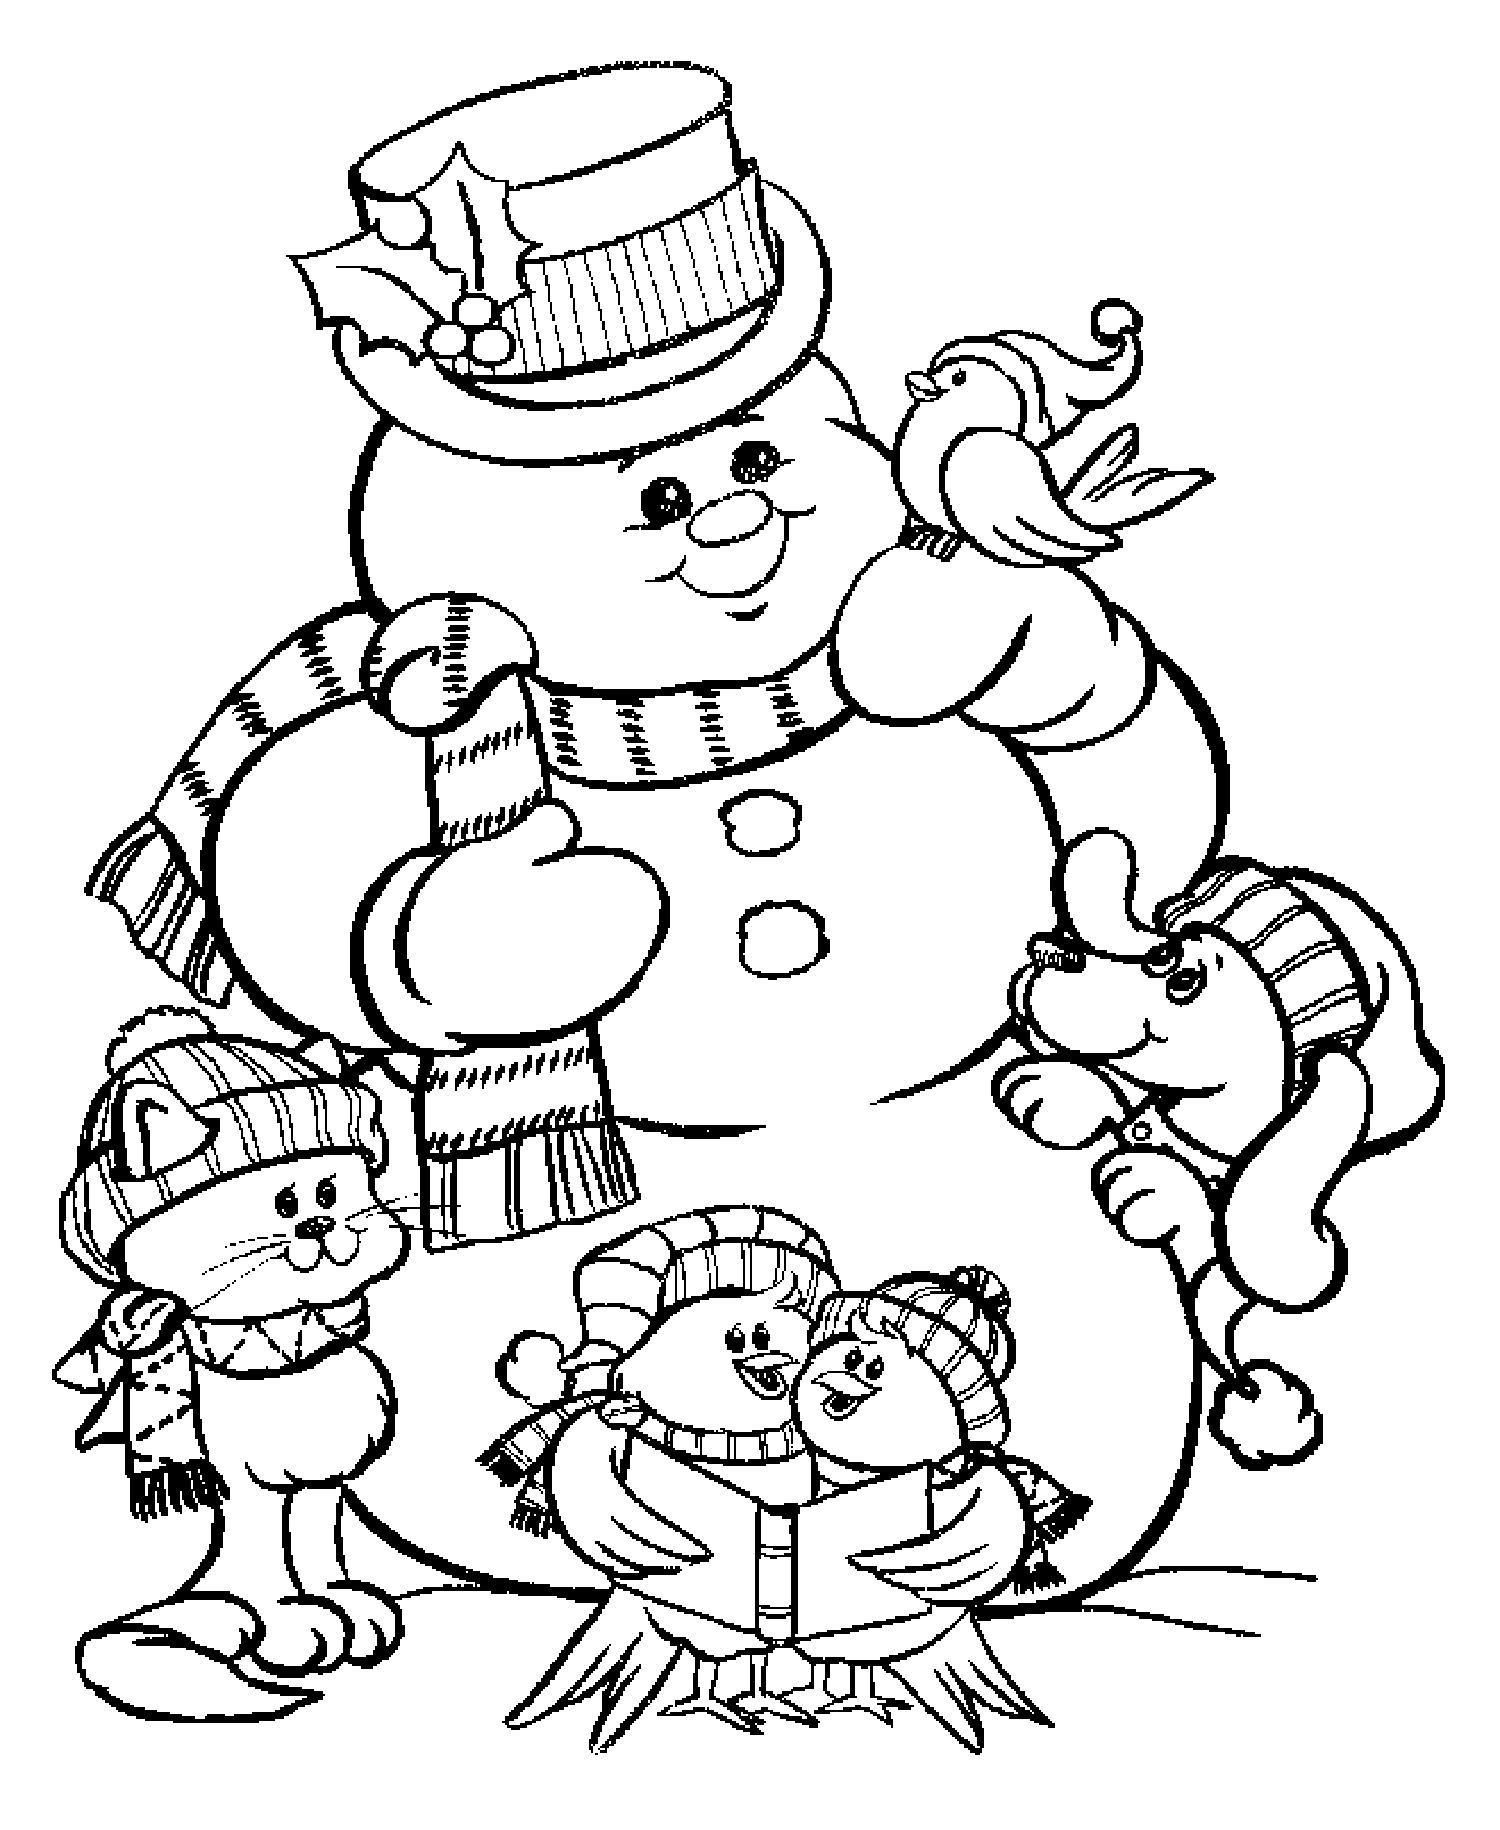 Christmas Coloring pages for kids to print & color